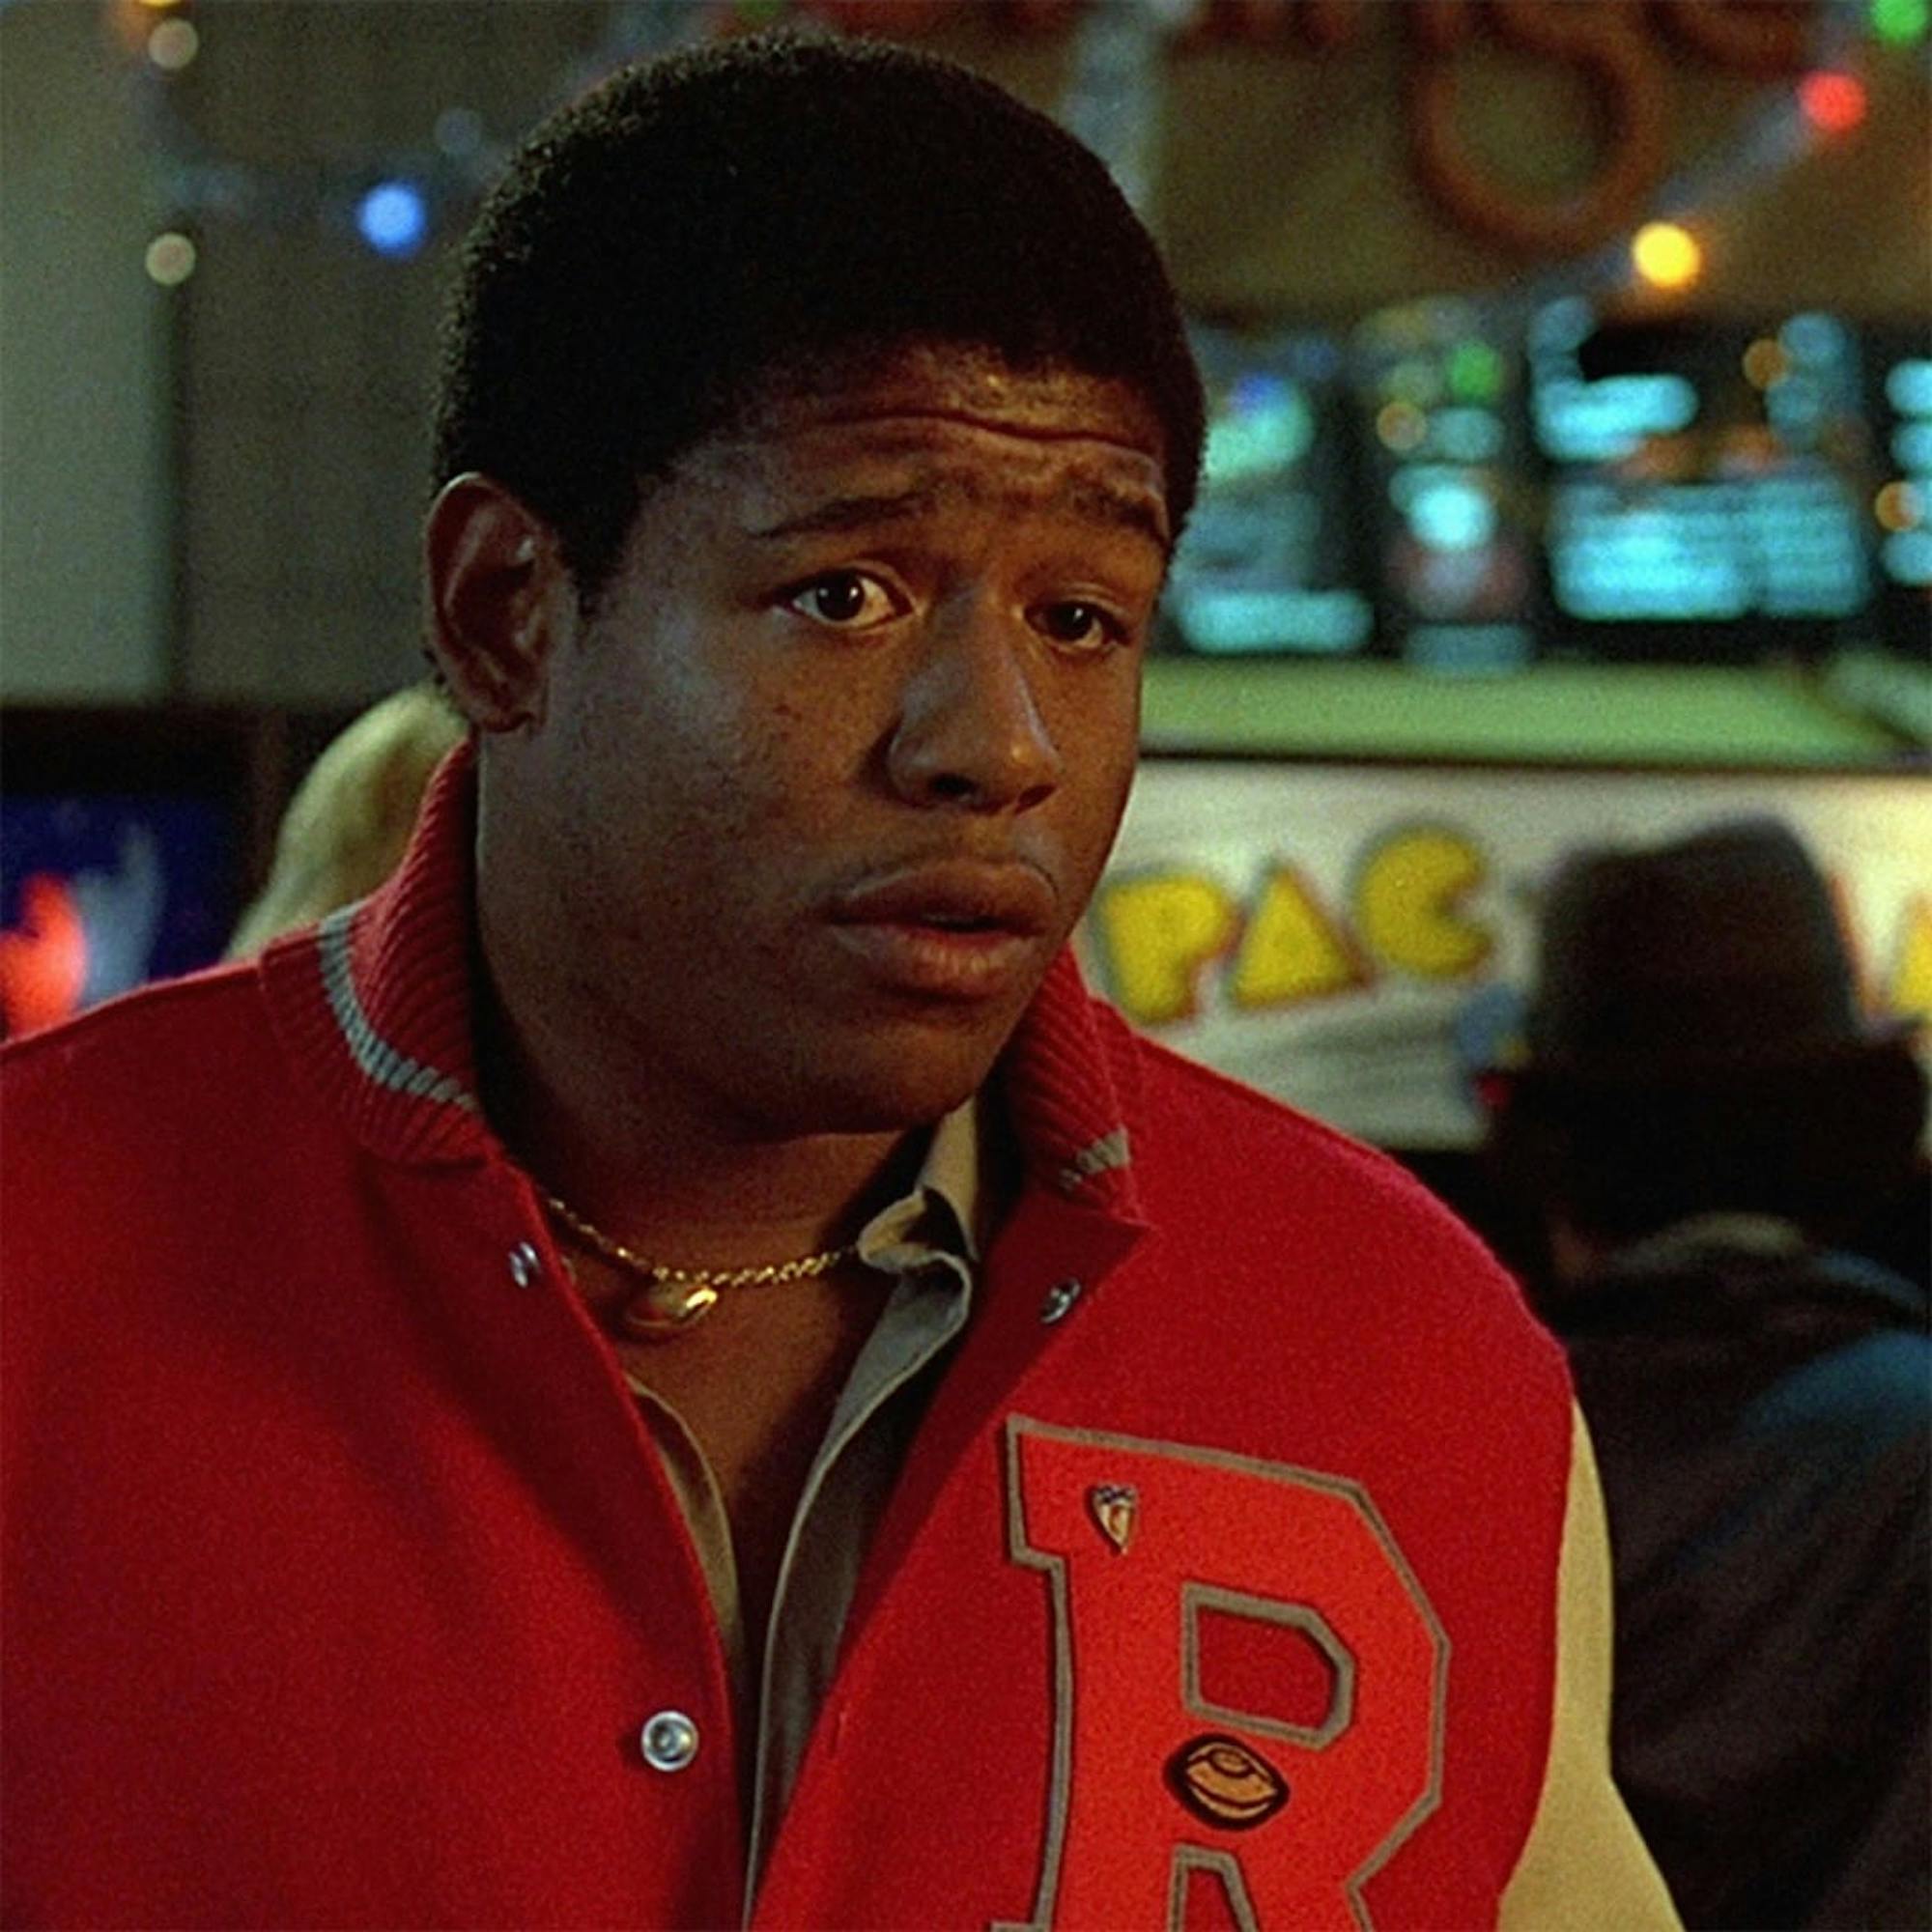 Forest Whitaker as Charles Jefferson in Fast Times at Ridgemont High